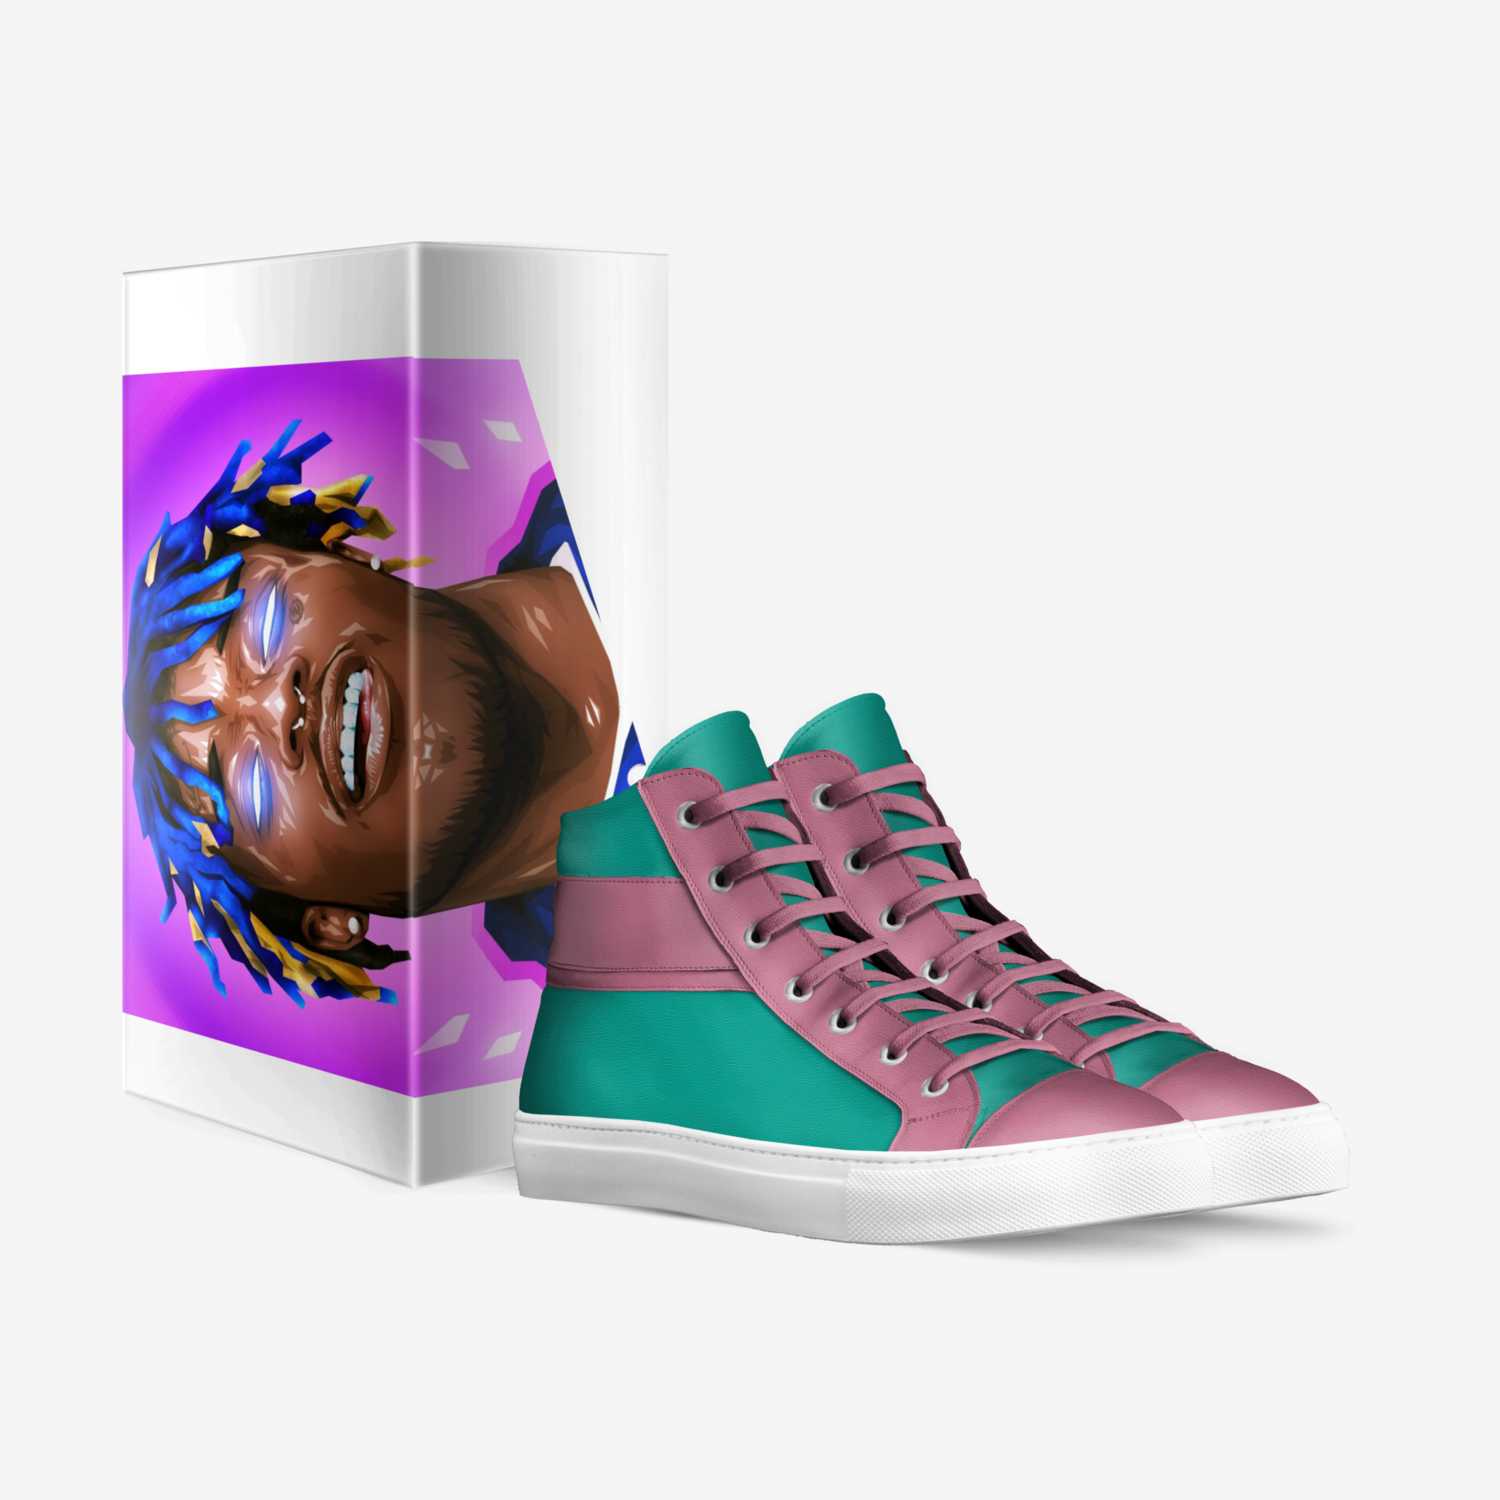 Lil uzi 1 custom made in Italy shoes by Mcrae Tomlinson | Box view